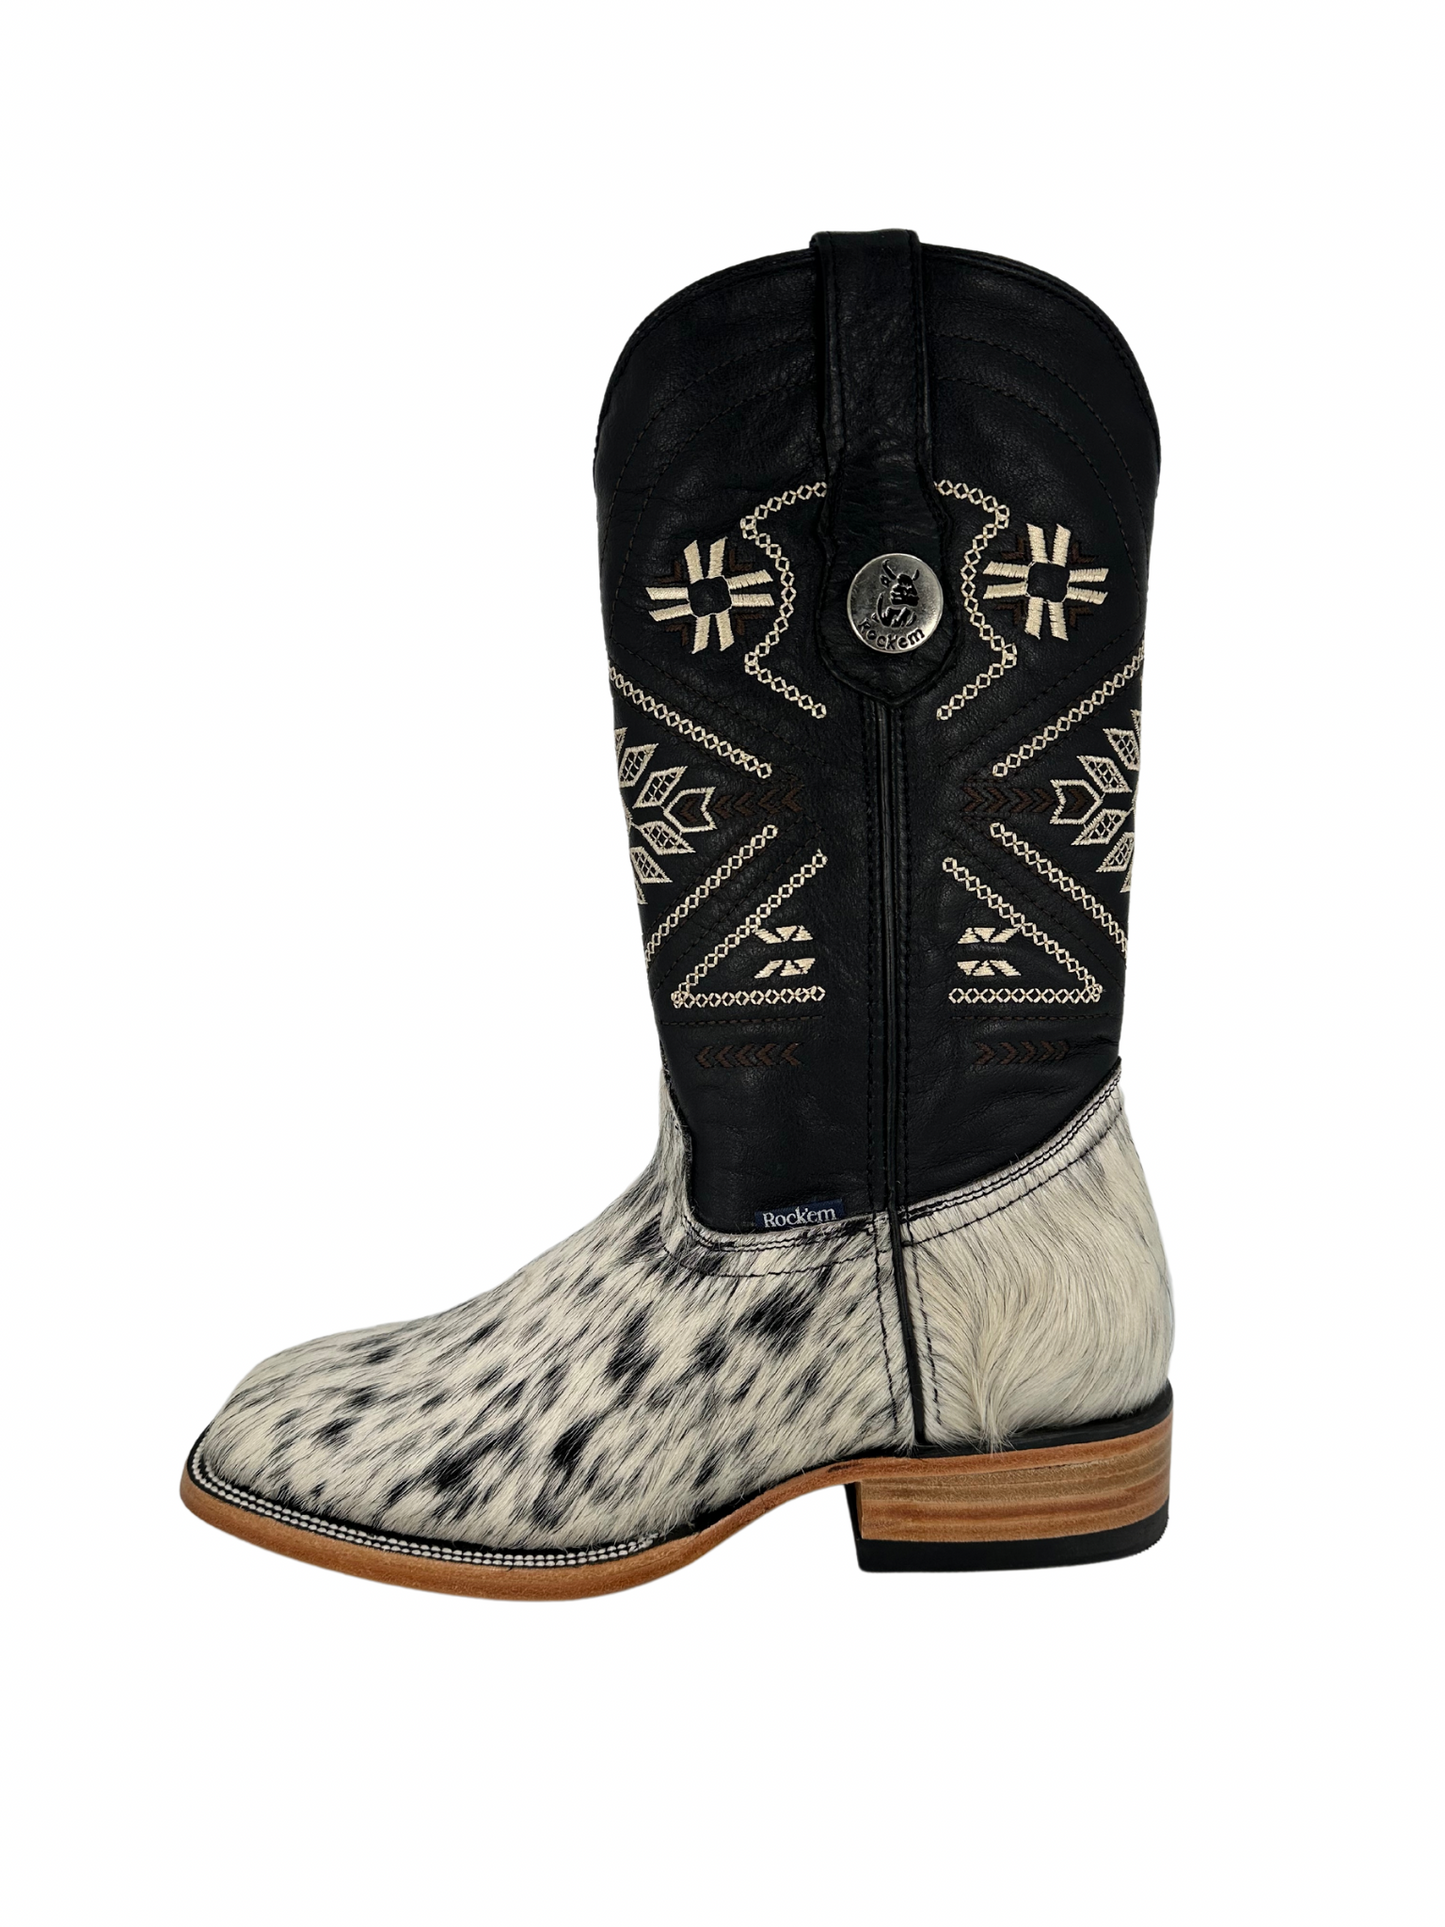 Rock'em Women's Cow Hair Boots Size: 8 *AS SEEN ON IMAGE*